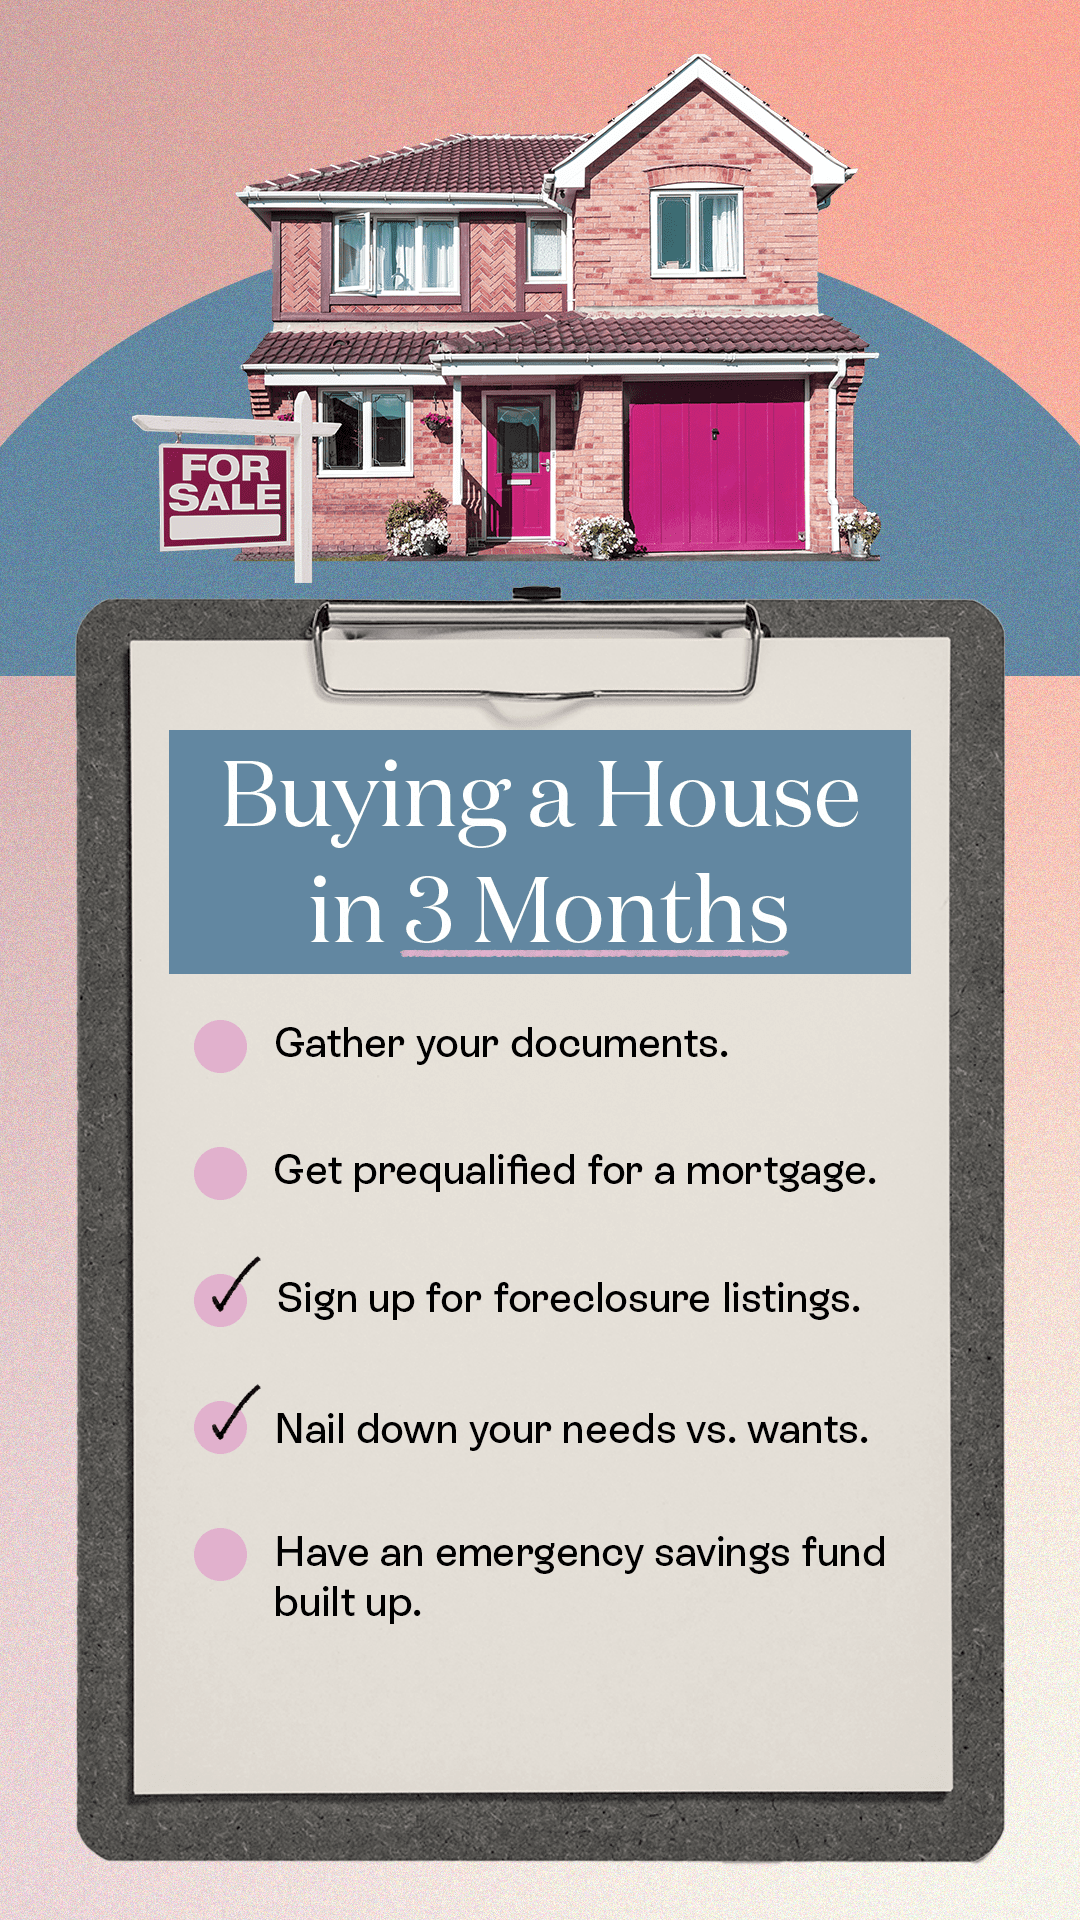 https://cdn.apartmenttherapy.info/image/upload/v1633721841/at/art/design/2021-10/buying-house-checklist/buying-house-ig-3-months.png